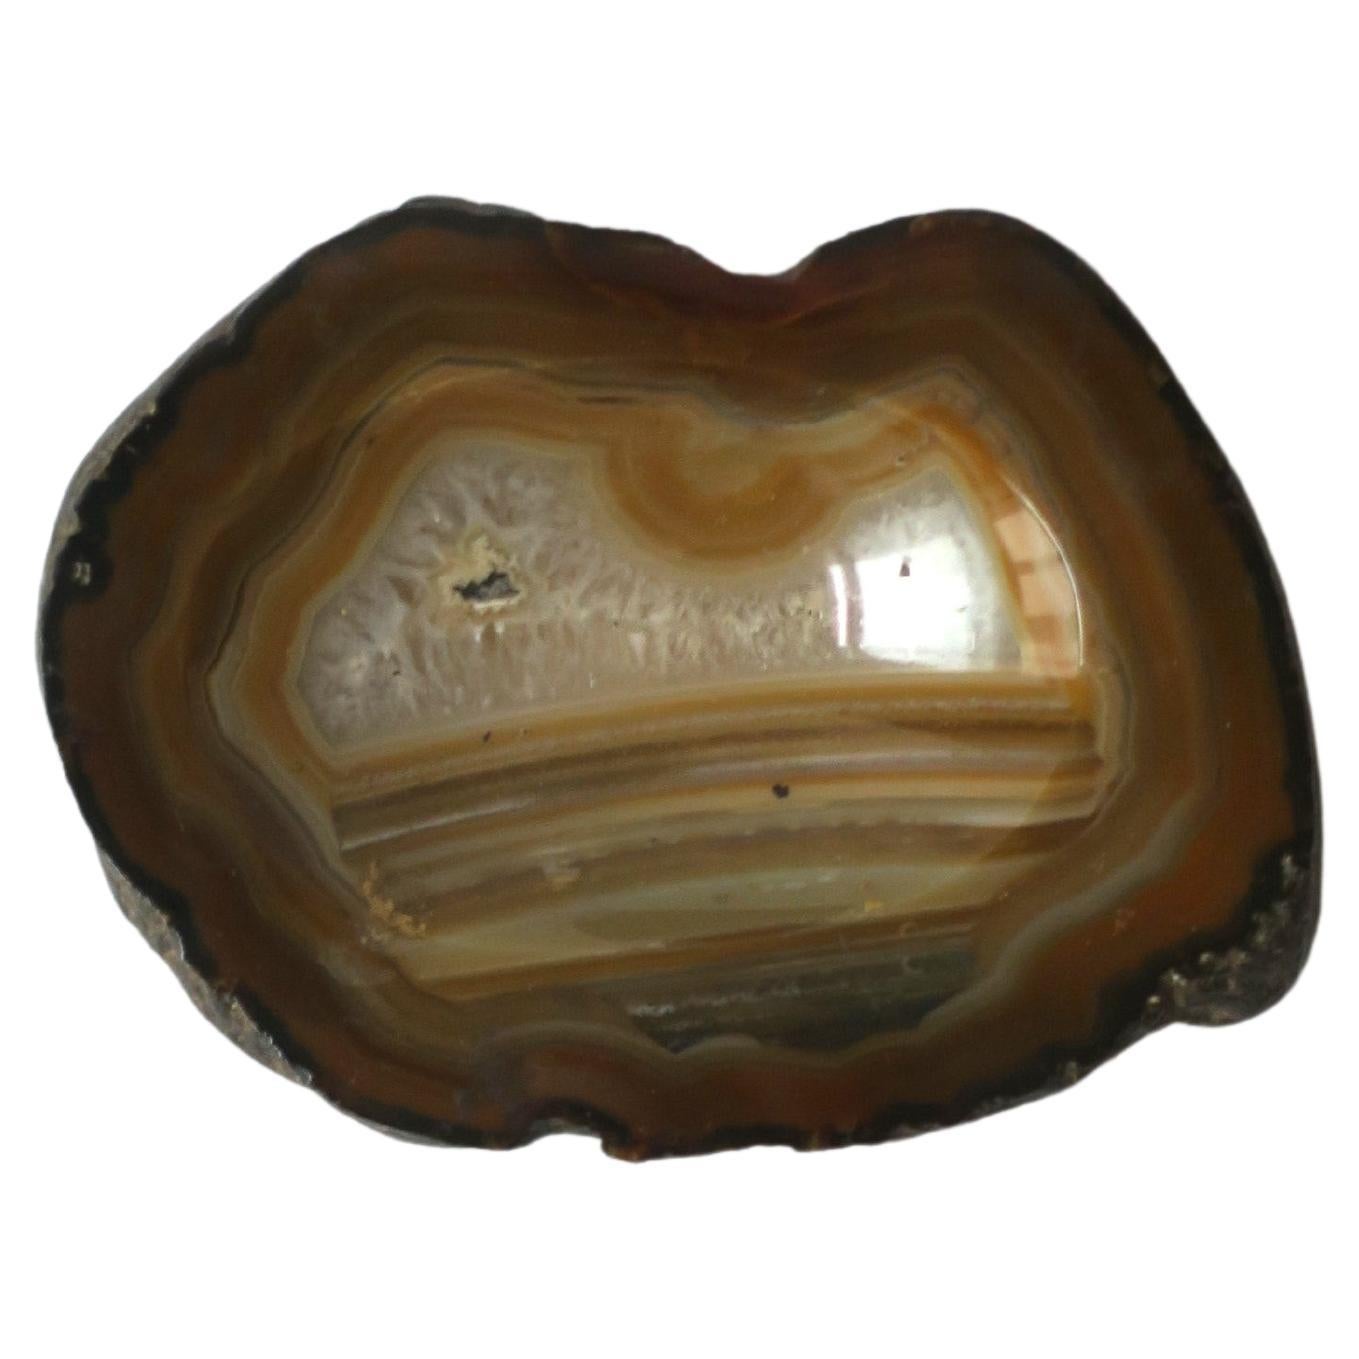 Agate Jewelry Dish with Ball Sphere, Set of 2